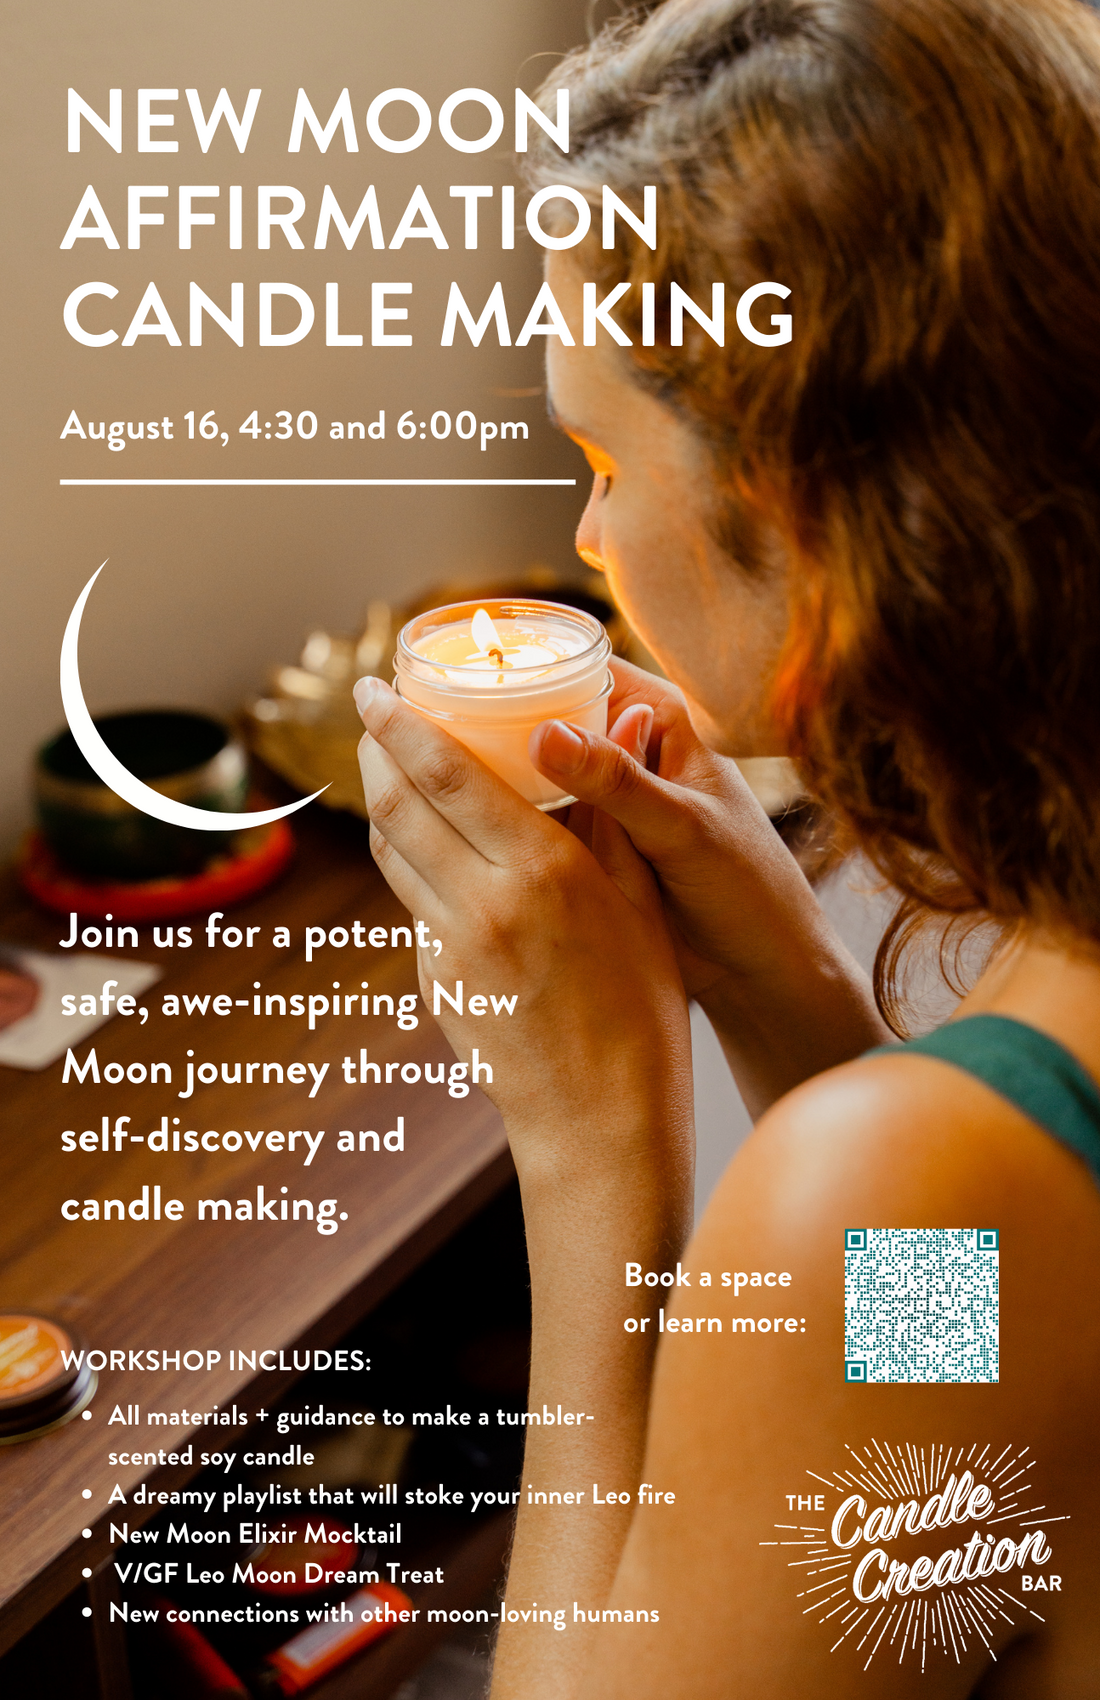 New Moon Candle Making Event on Aug 16! ☽